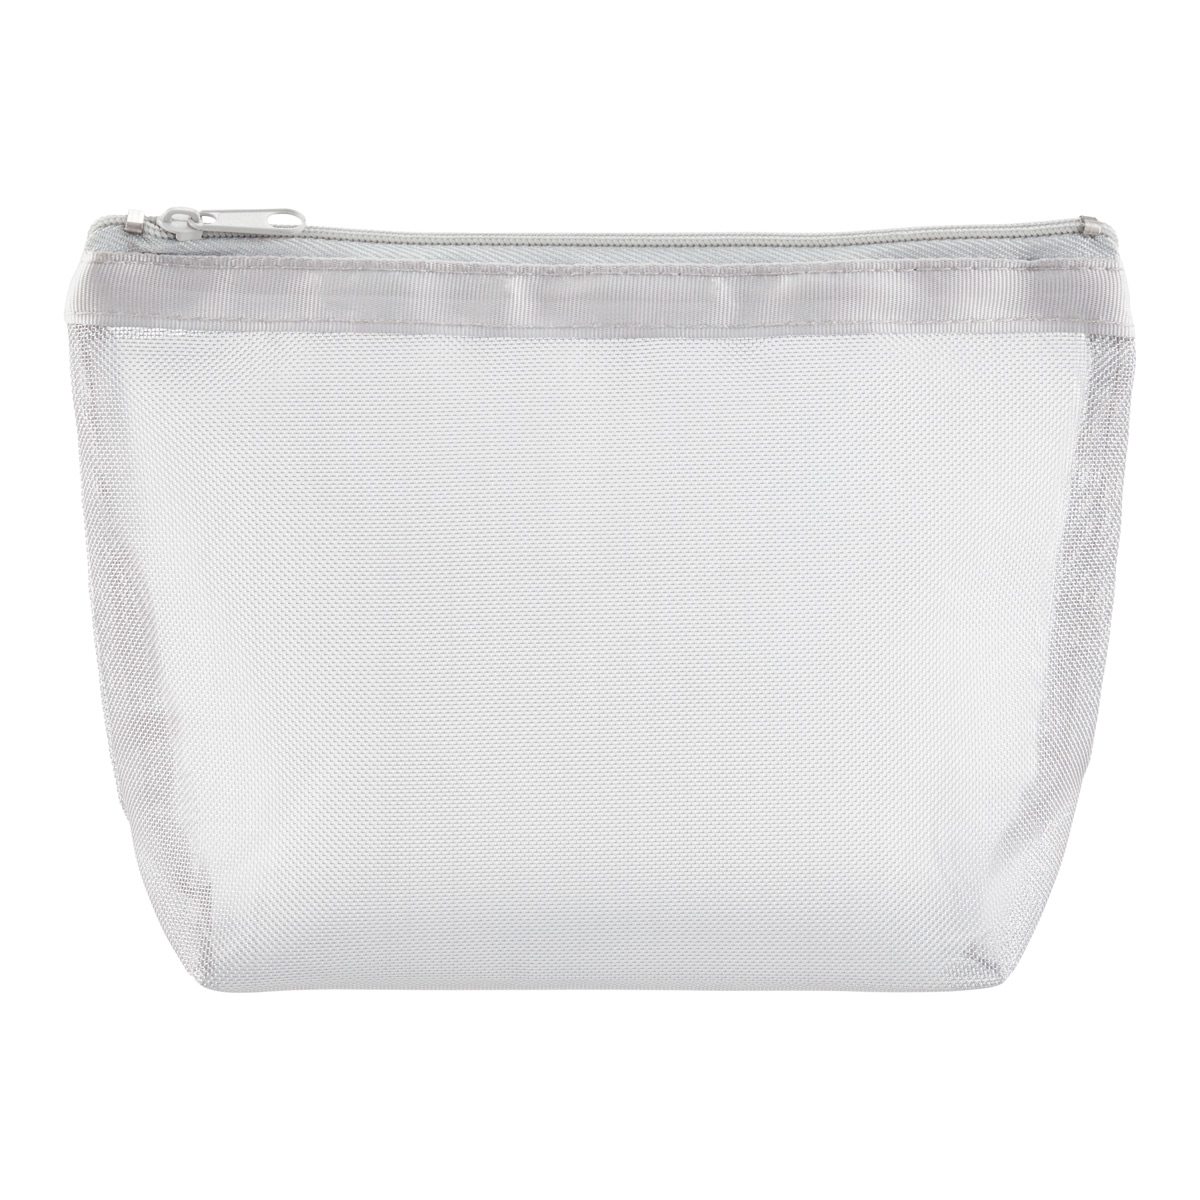 Clear Iridescent Holographic Makeup Bag, Cosmetic Pouches with Zipper  Travel Organizer Case for Purse Diaper Bag - Style 4 - Walmart.com